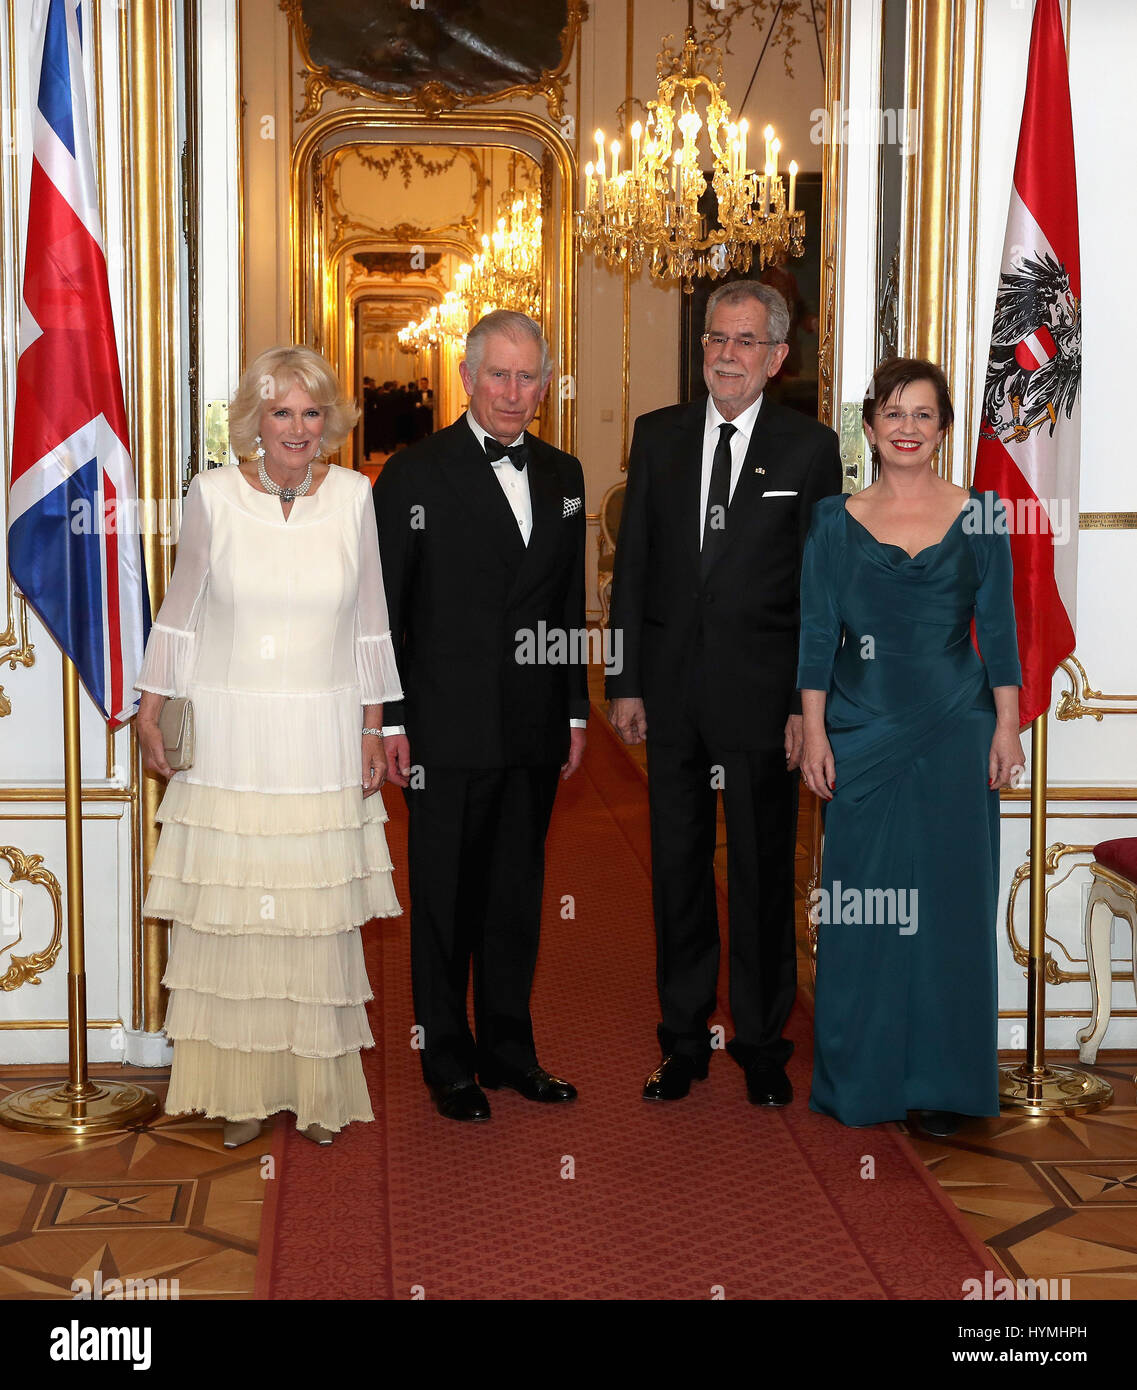 The Prince of Wales and the Duchess of Cornwall (left) are greeted by Federal President of the Republic of Austria Alexander Van der Bellen and First Lady Doris Schmidauer as they arrive at Hofburg Palace in Austria. Stock Photo